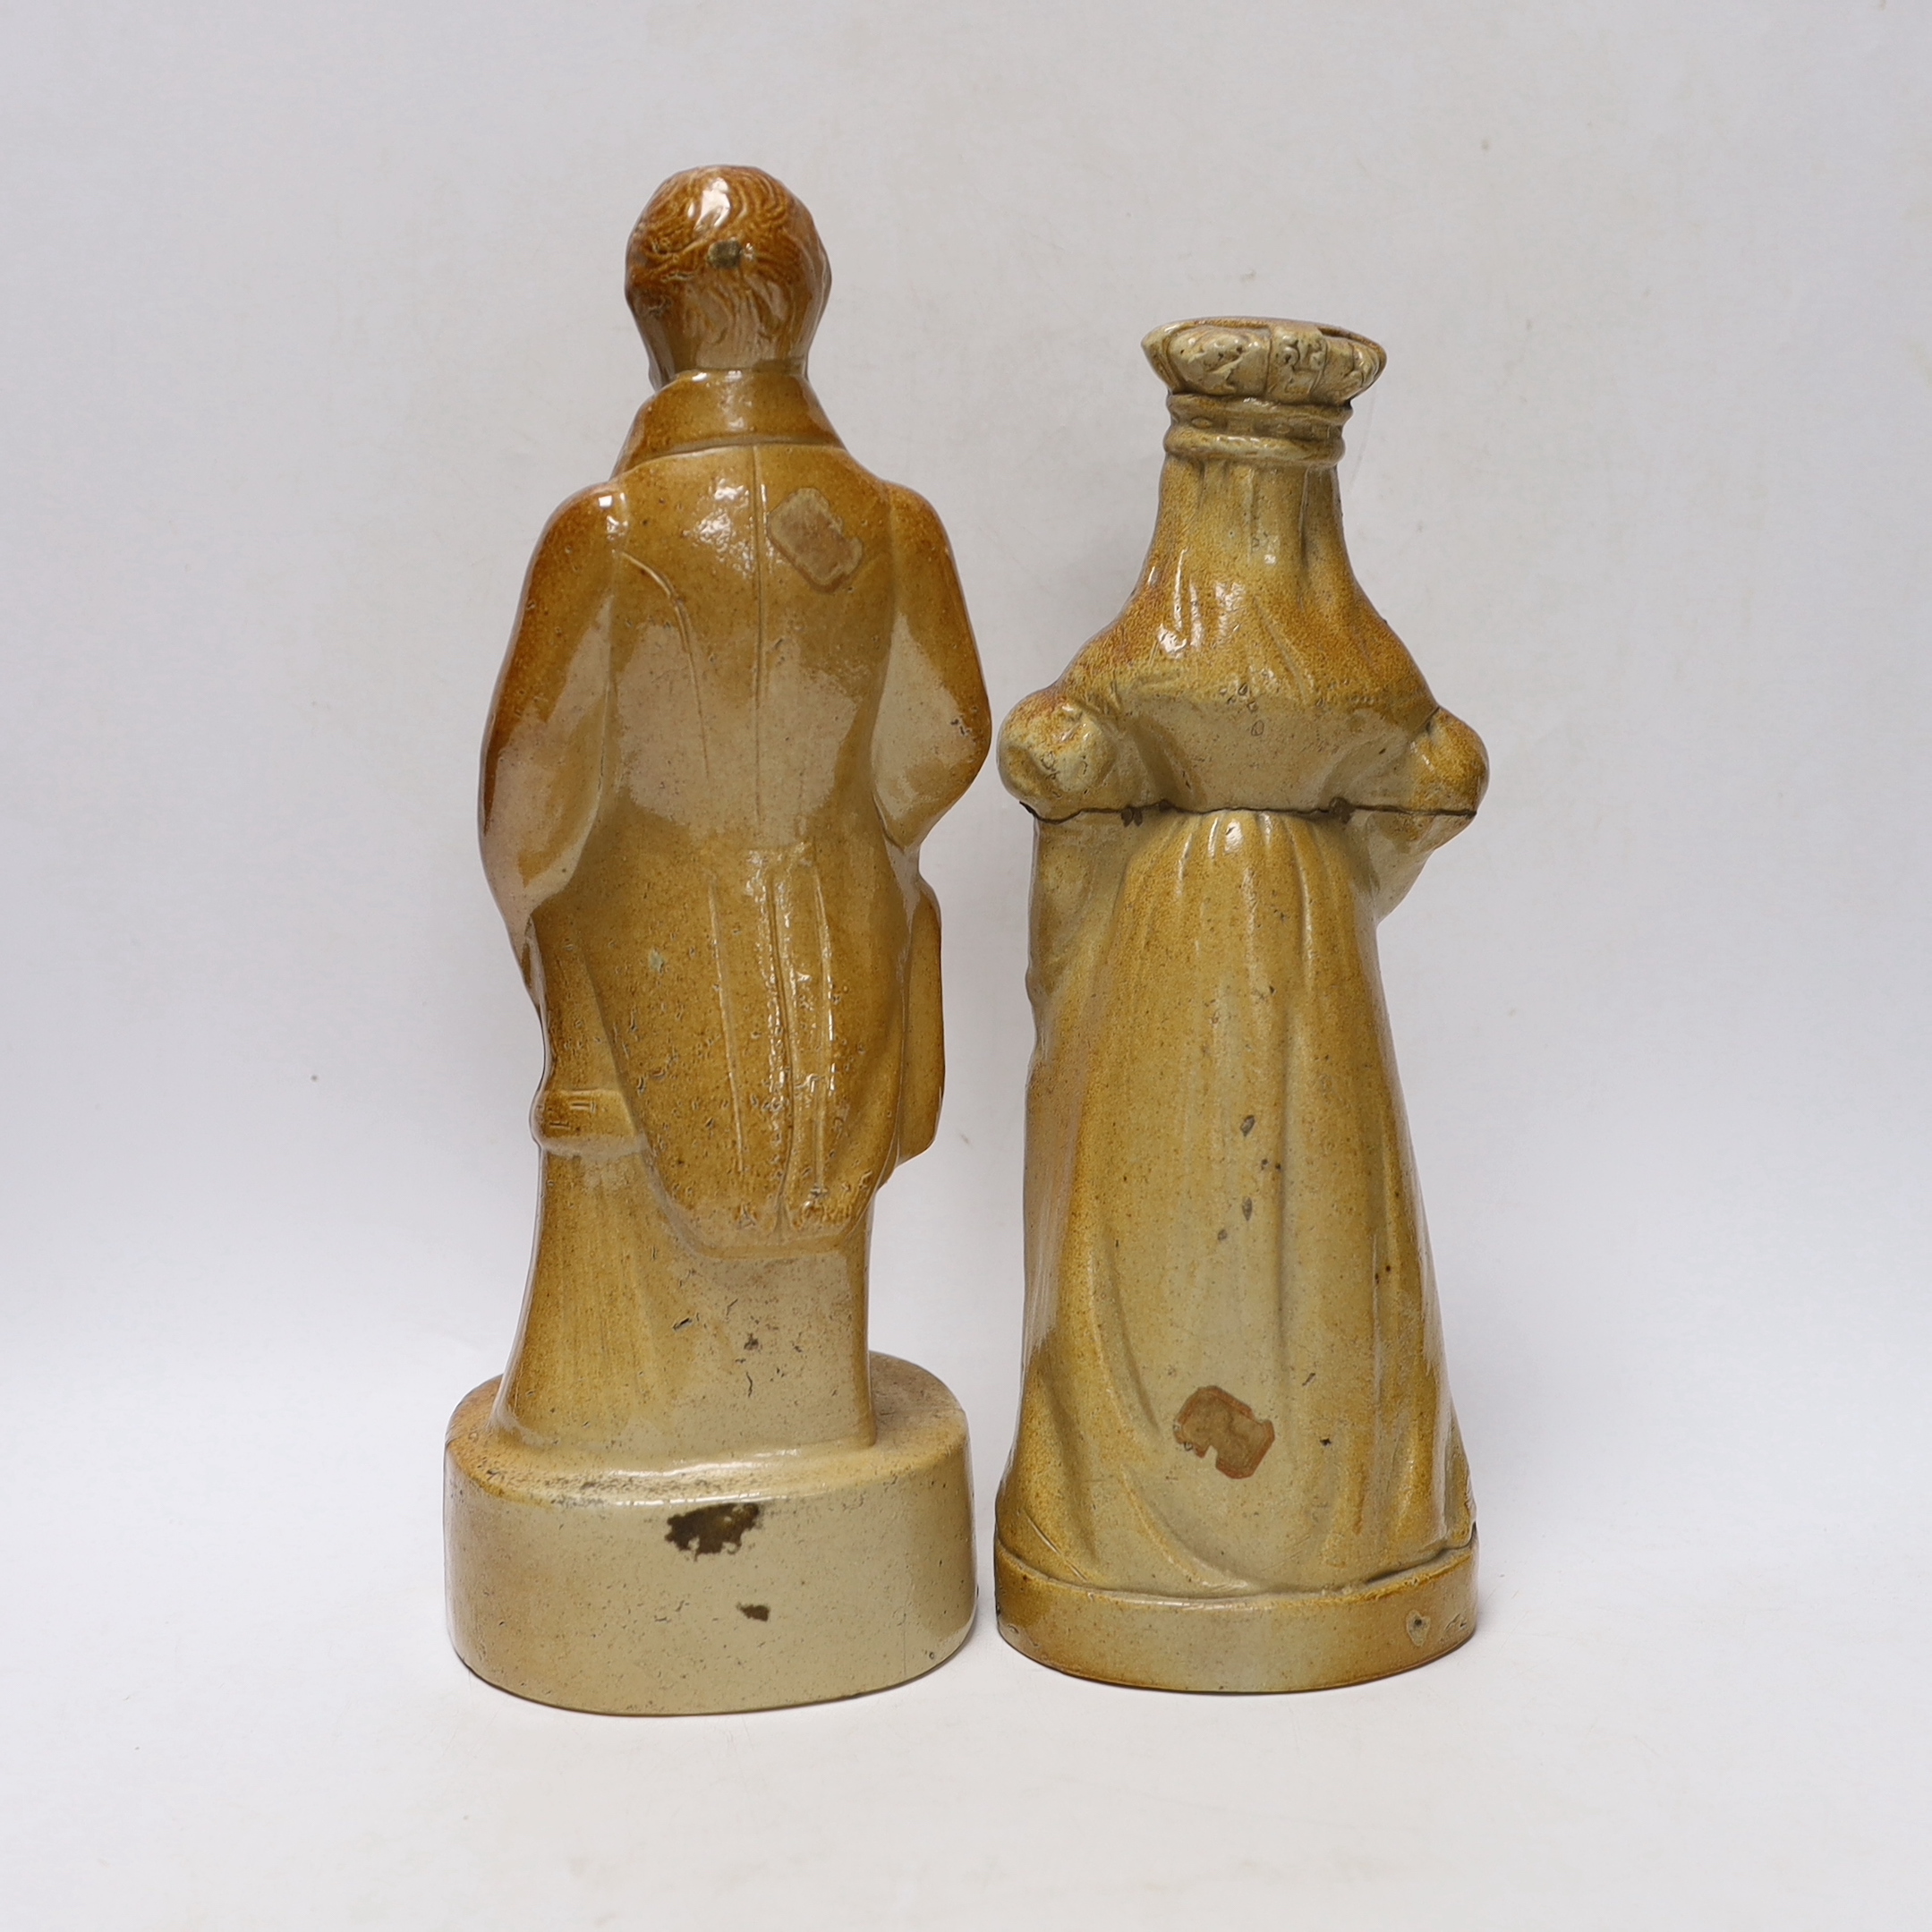 Two Victorian salt glaze spirit flasks, probably Lambeth, the first commemorating the repeal of the Corn Laws in 1846, modelled as Sir Robert Peel and the second modelled as Queen Victoria holding a scroll, impressed 